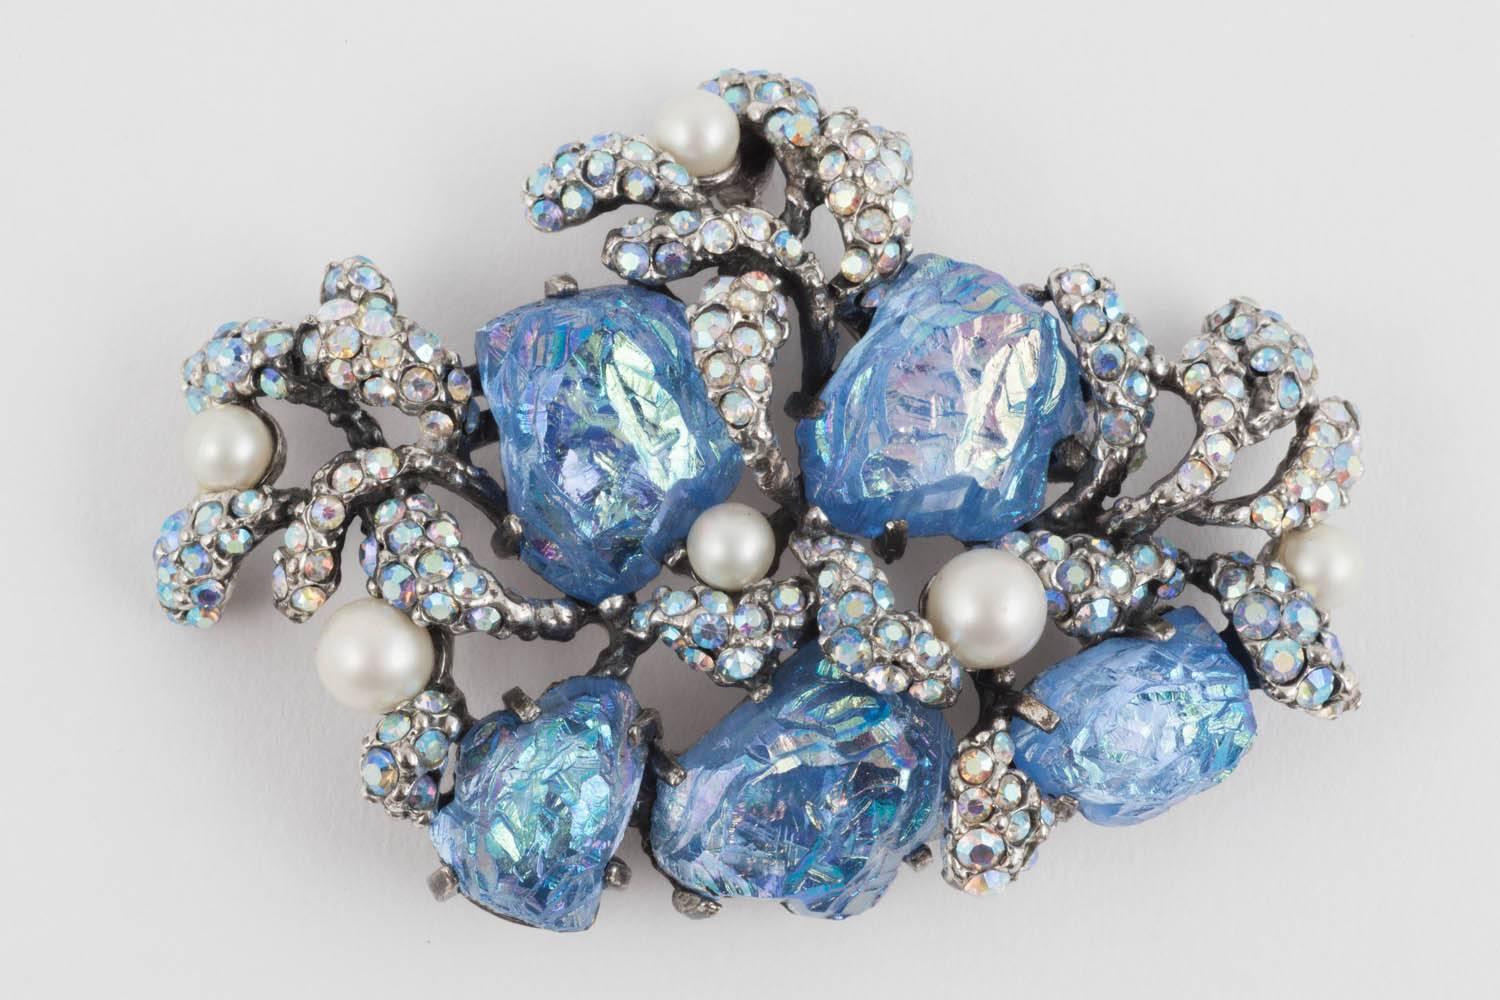 Schiaparelli uses this highly surrealistic subject matter, seaweed, to create a ravishing brooch and earrings, featuring her celebrated 'lava' stones, in blue, the 'seaweed' encrusted in aurora borealis pastes, so fashionable at the time of